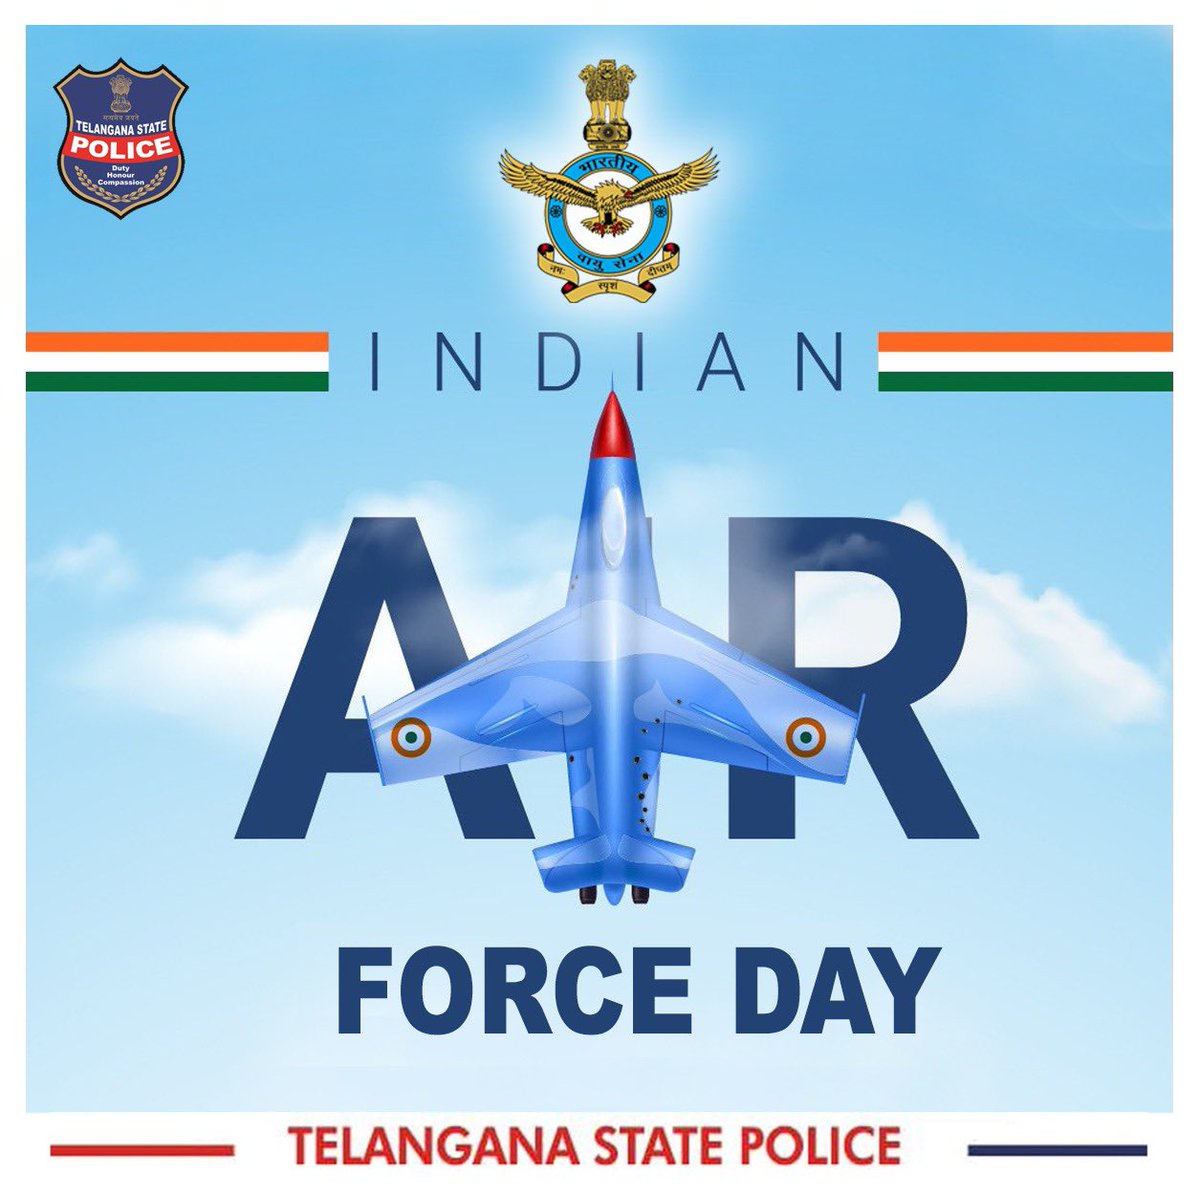 On the 90th Indian Air Force Day, #TelanganaStatePolice salutes all air force personnel for their bravery, compassion, and dedication towards safeguarding our nation.

#AirForceDay